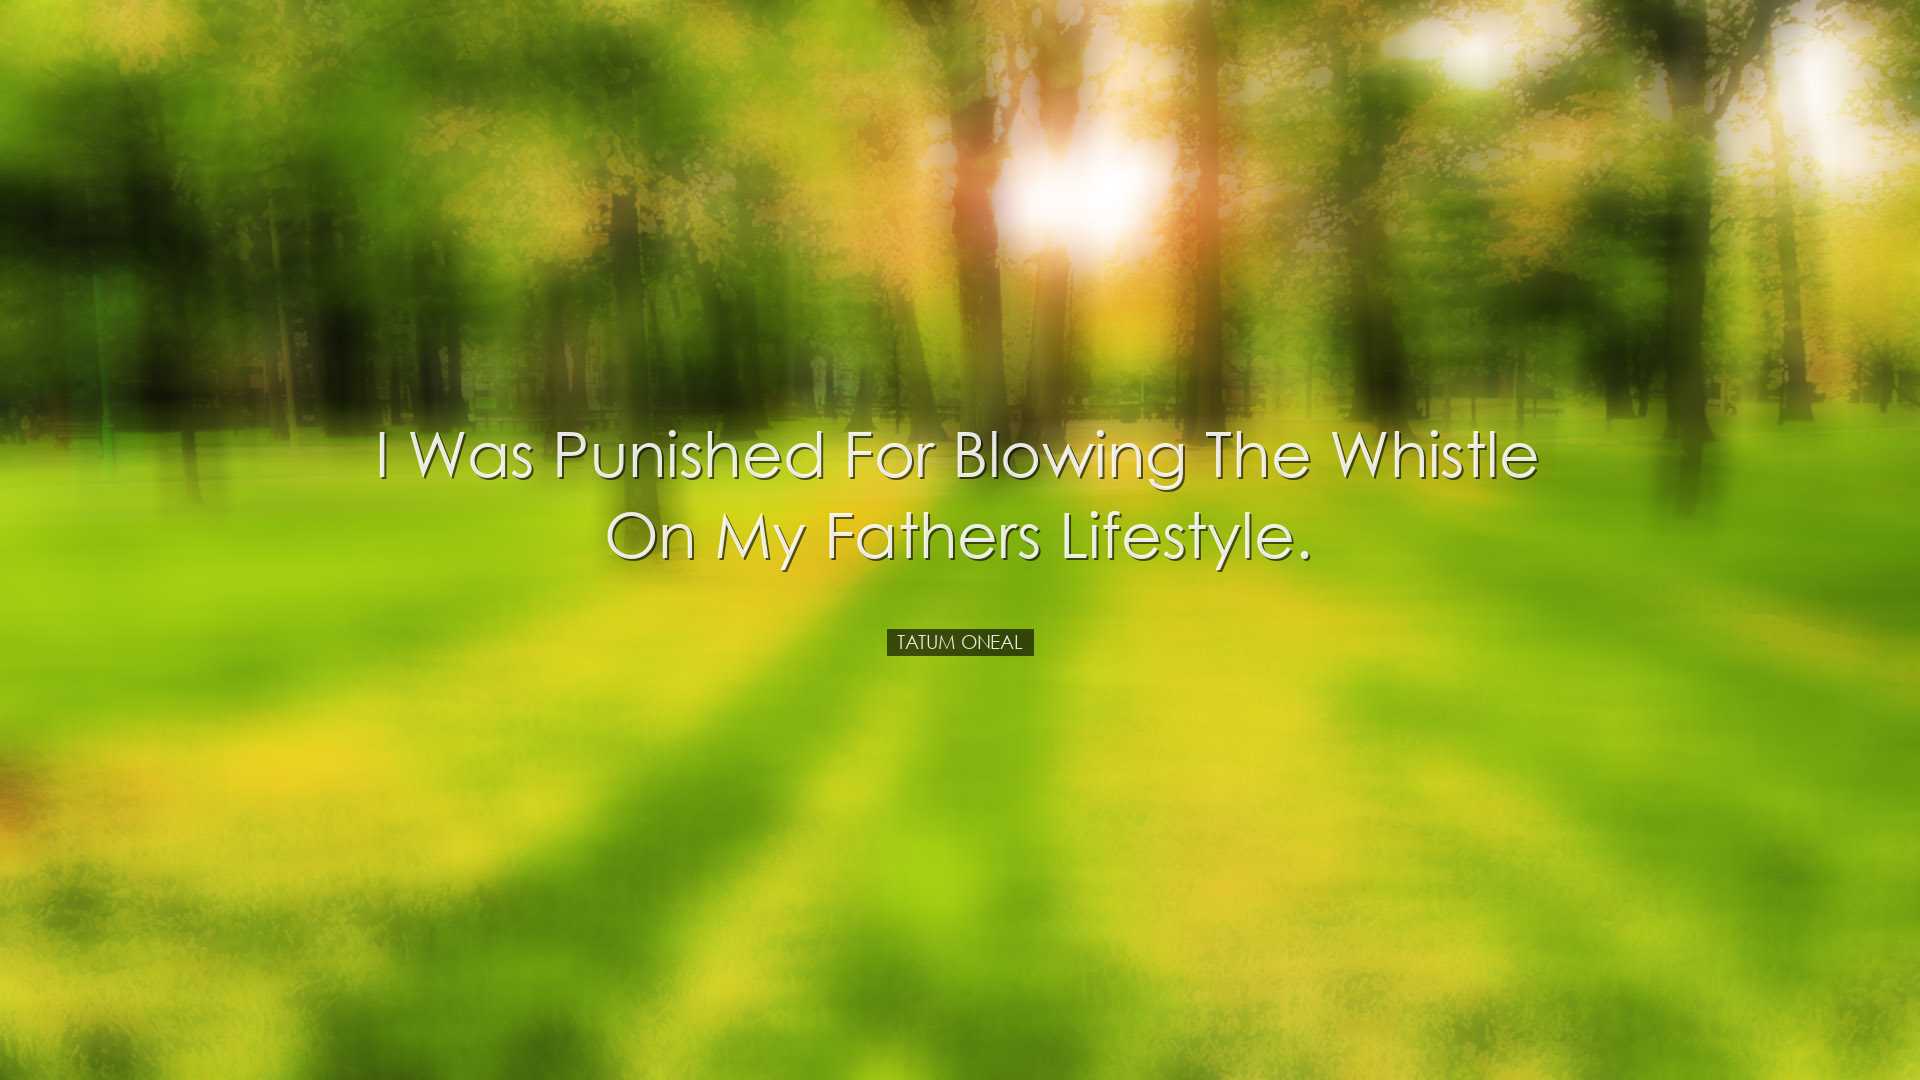 I was punished for blowing the whistle on my fathers lifestyle. -